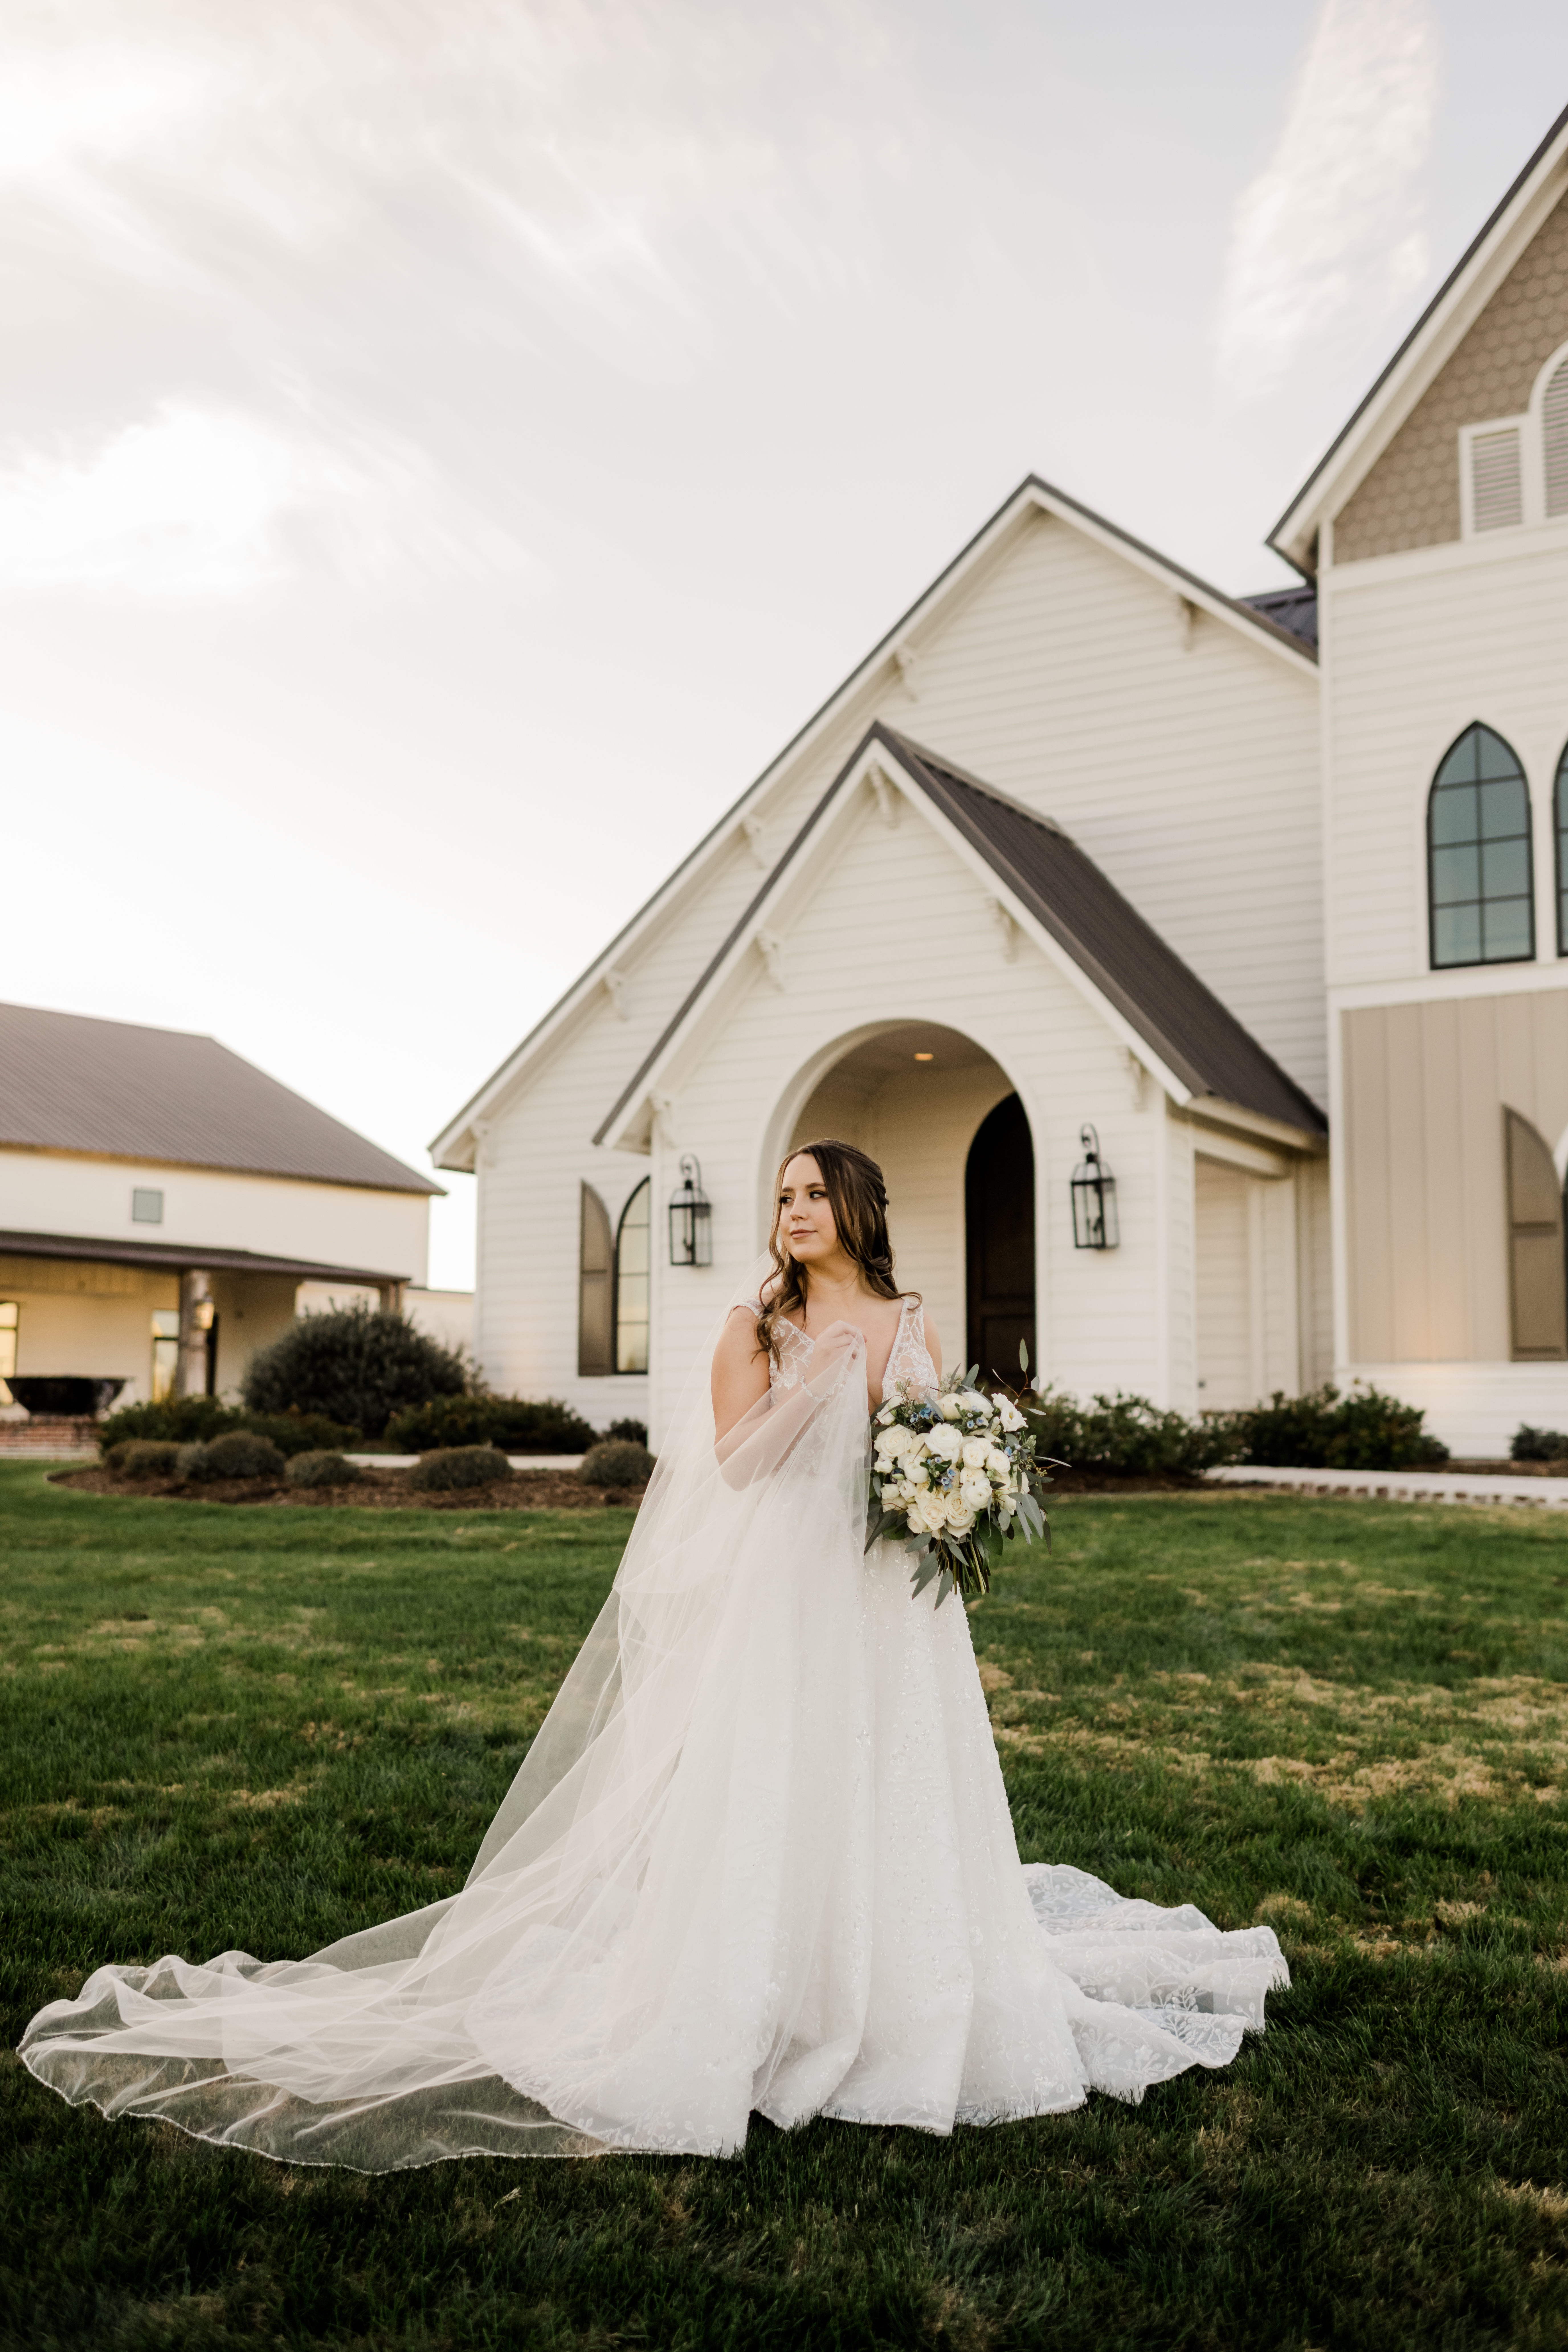 Caroline's Bridal Session at Deep In The Heart Farms in Brenham, Texas with Rachel Driskell Photography